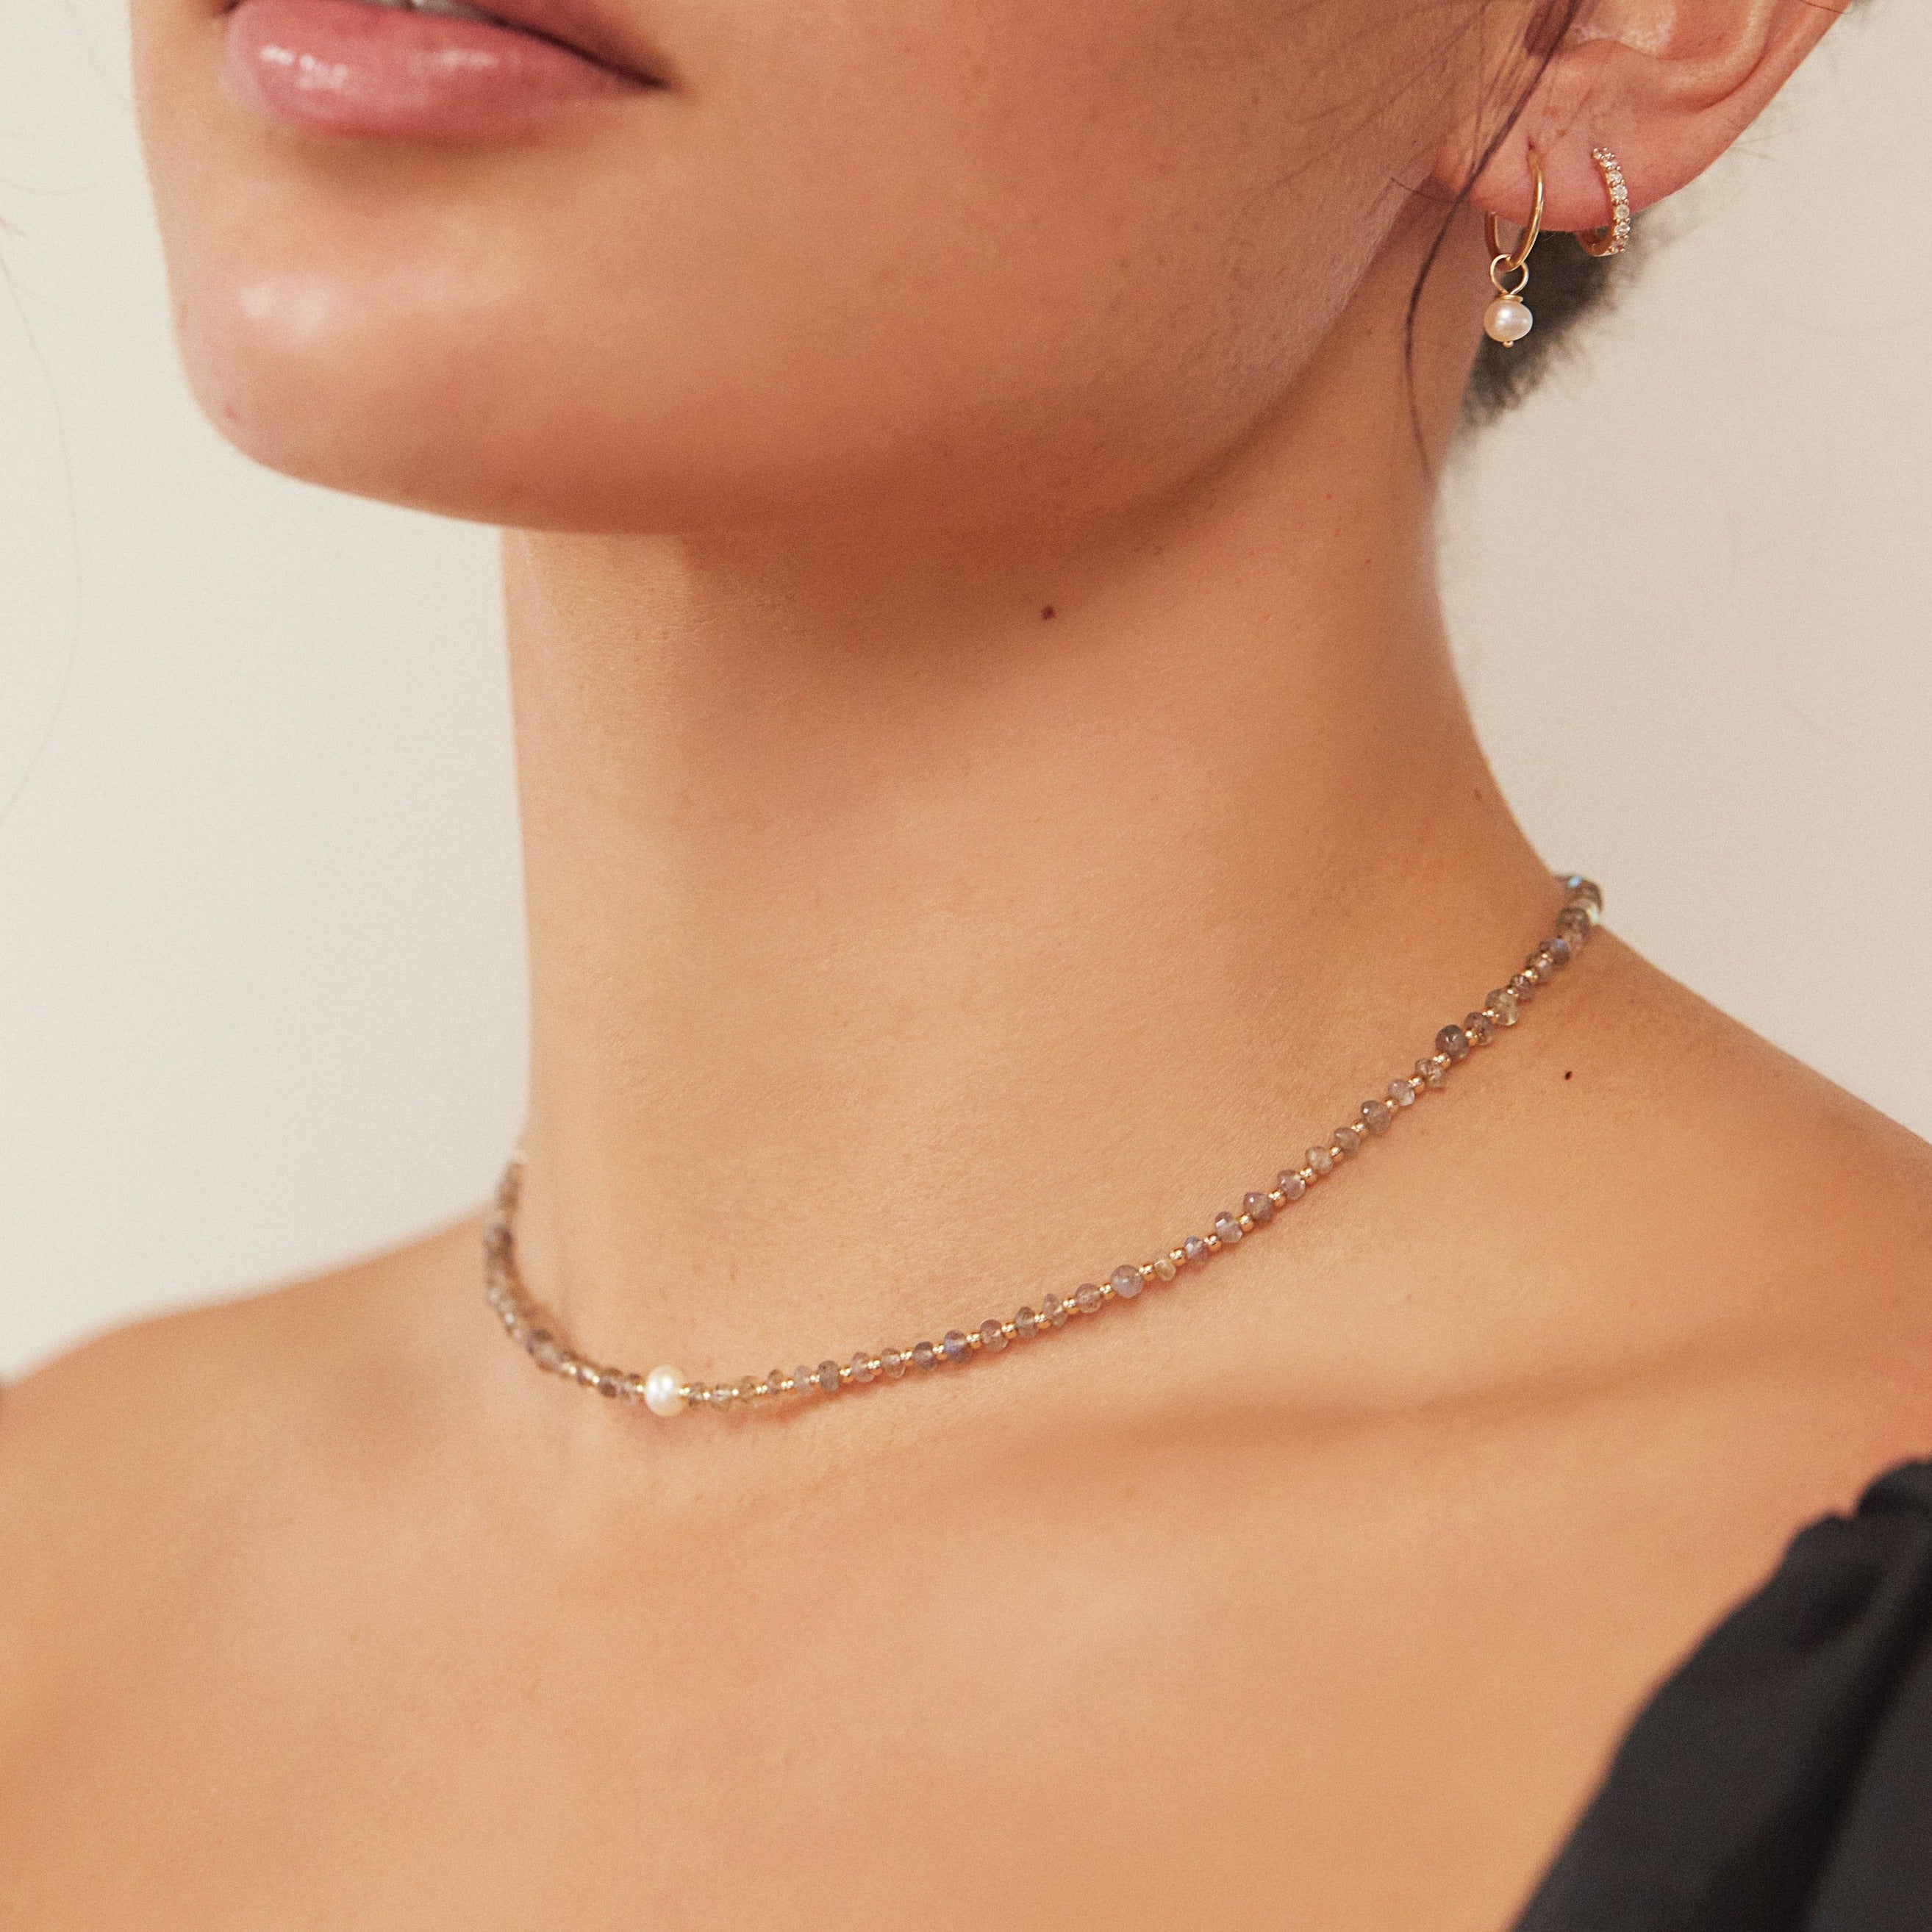 Gold labradorite gemstone choker around a neck with a pearl earring and diamond style earring in one ear lobe